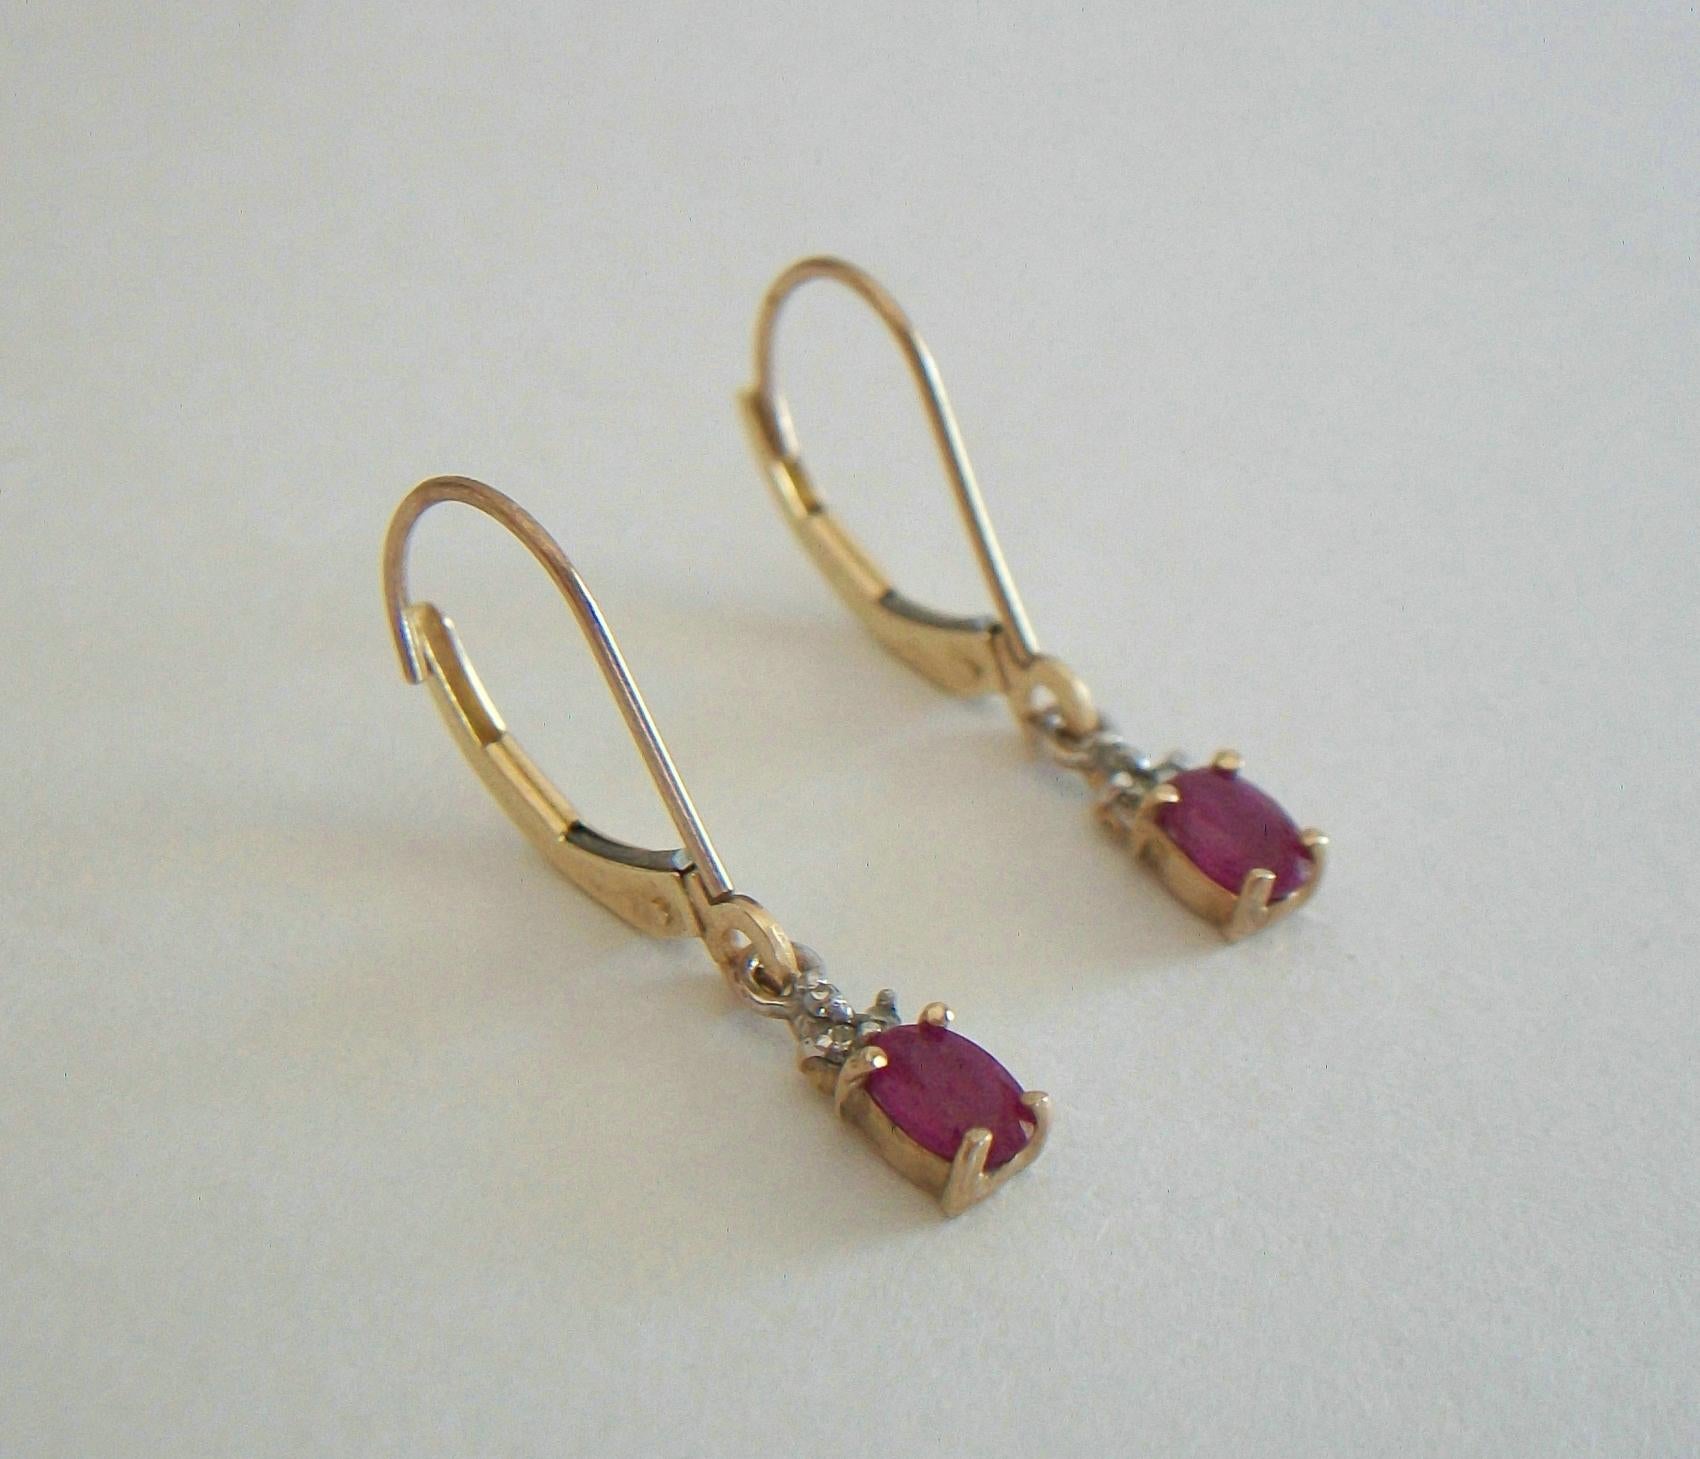 Vintage delicate pair of 10K yellow gold pendant earrings - each earring featuring a synthetic Ruby (prong set - oval faceted cut - 6.0 x 3.5 x 2.5 mm. - approx. .35 carats each) - above each ruby are 3 small diamonds set in white gold (claw set -